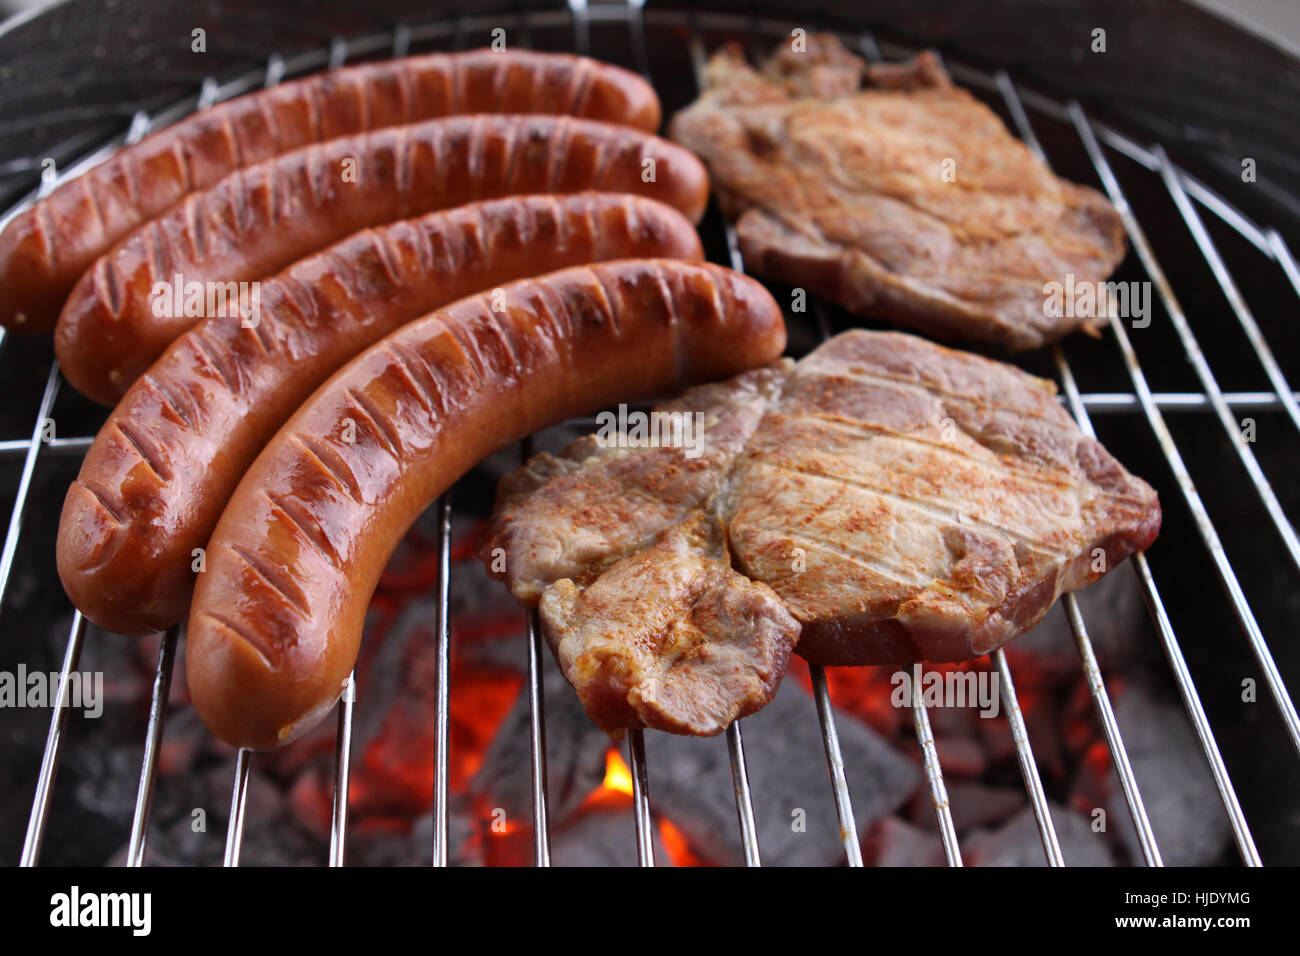 Grill, Barbecue, barbeque, bistecche, barbeque, bar-b-Q, insalubrious, estate, summerly, Foto Stock